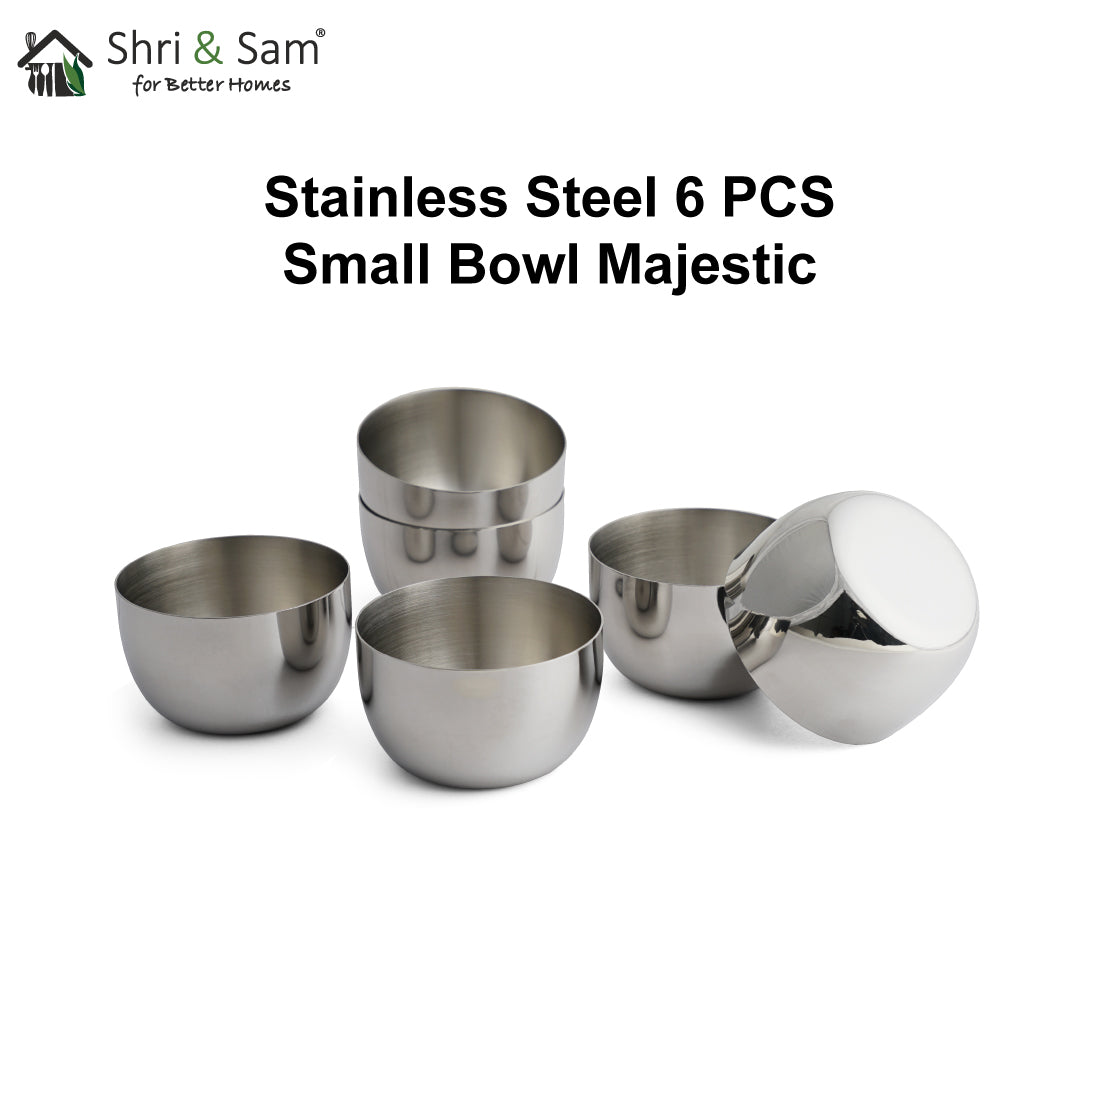 Stainless Steel 6 PCS Small Bowl Majestic